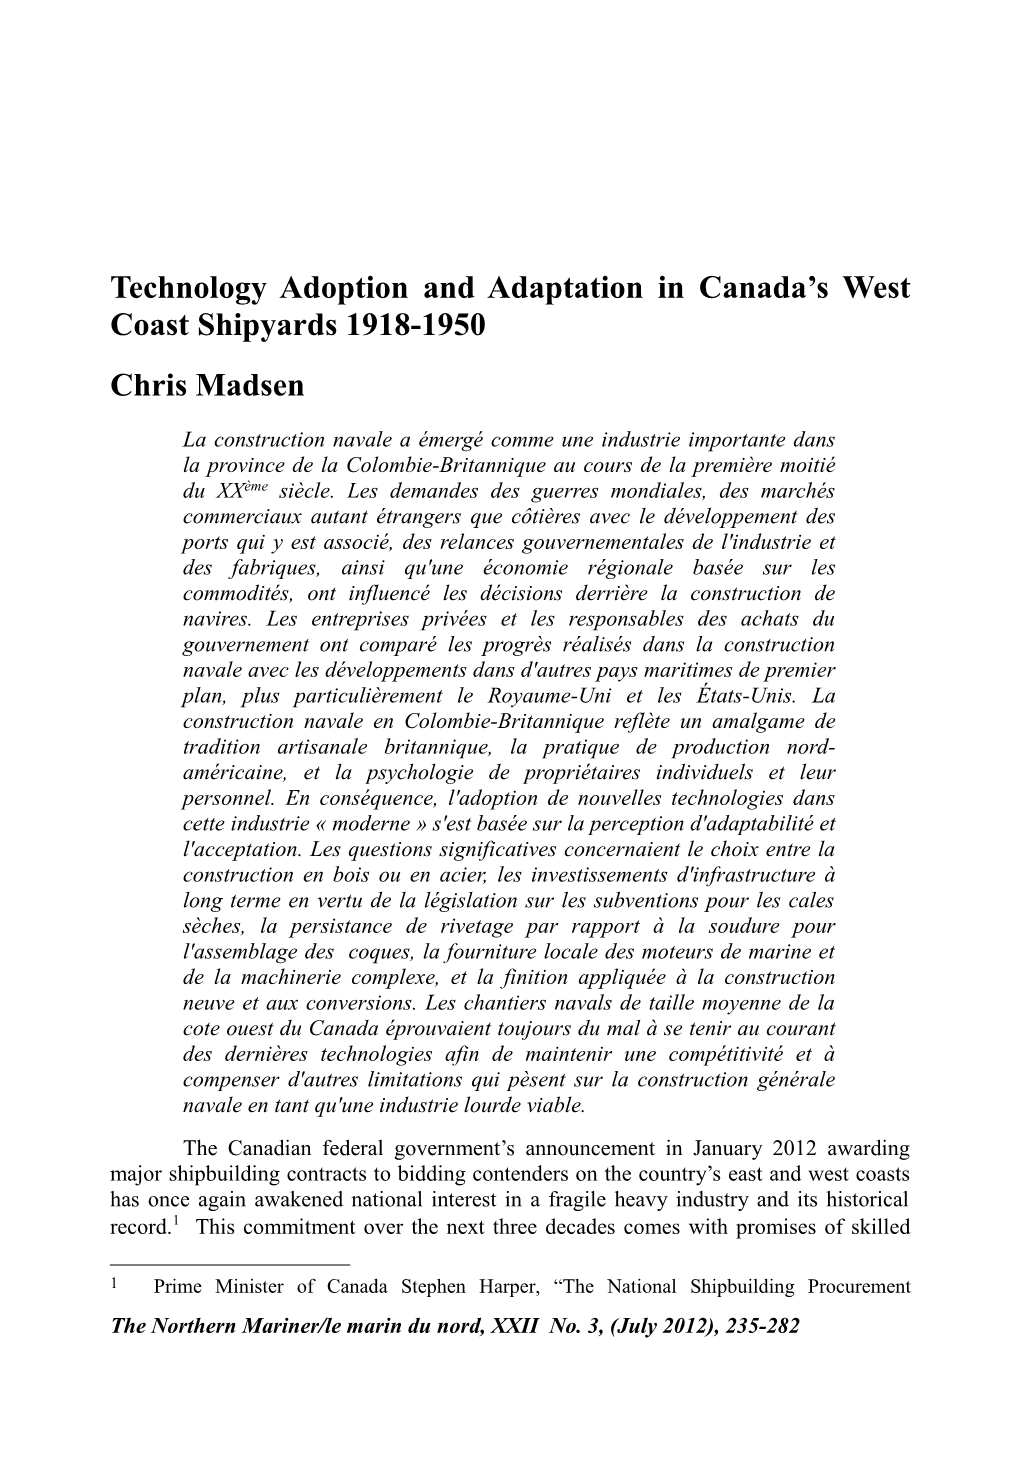 Technology Adoption and Adaptation in Canada's West Coast Shipyards